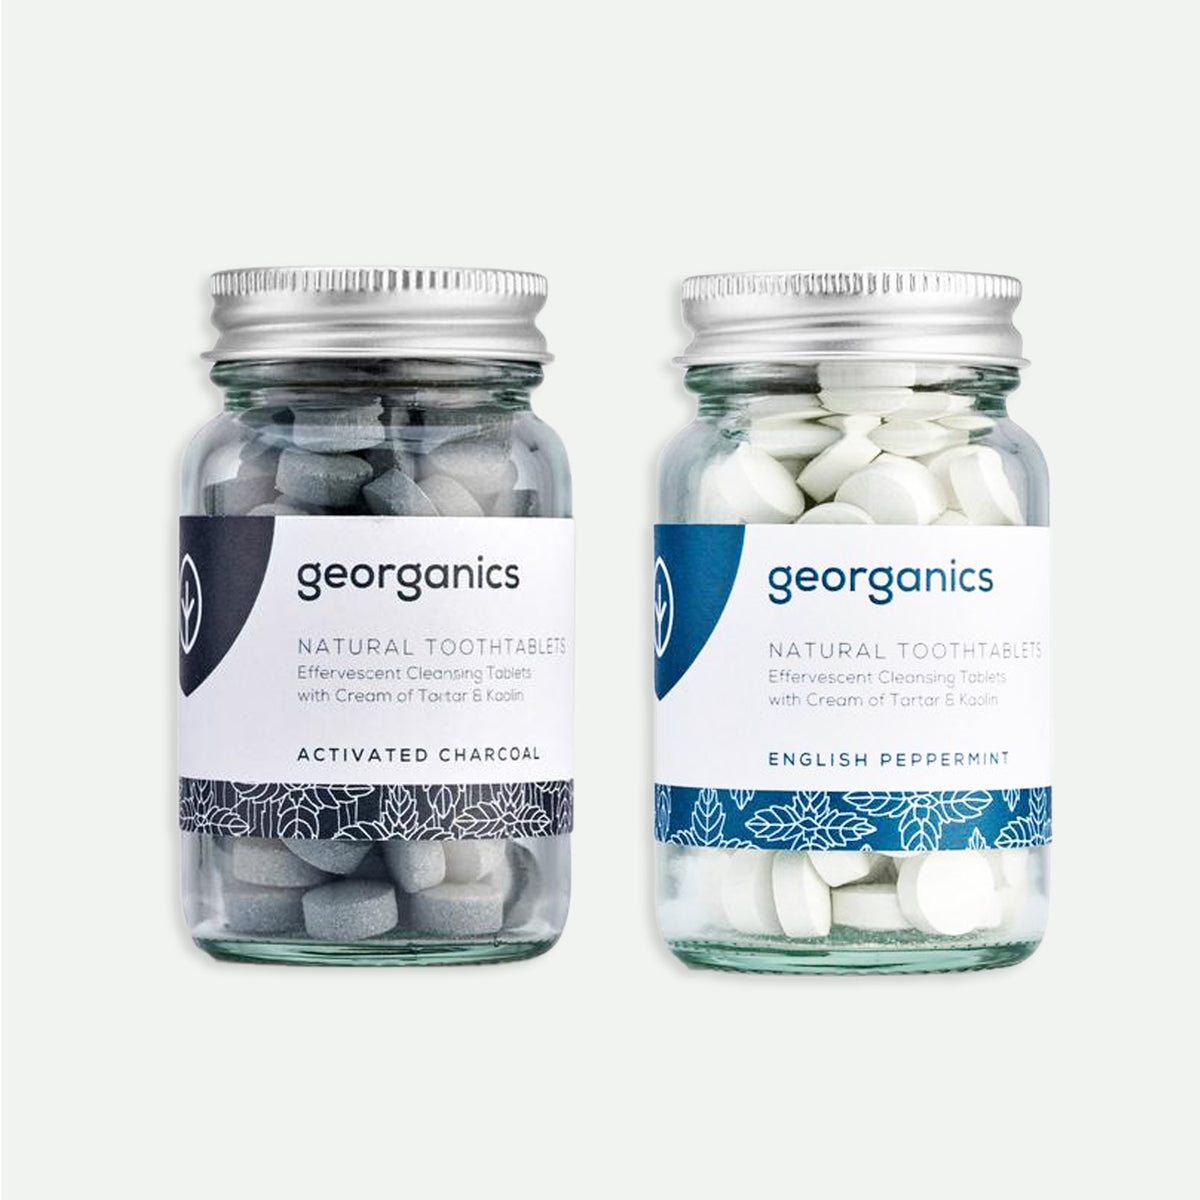 Two Georganics natural tooth tablet glass jars standing next to each other. In Activated Charcoal and English Peppermint flavors